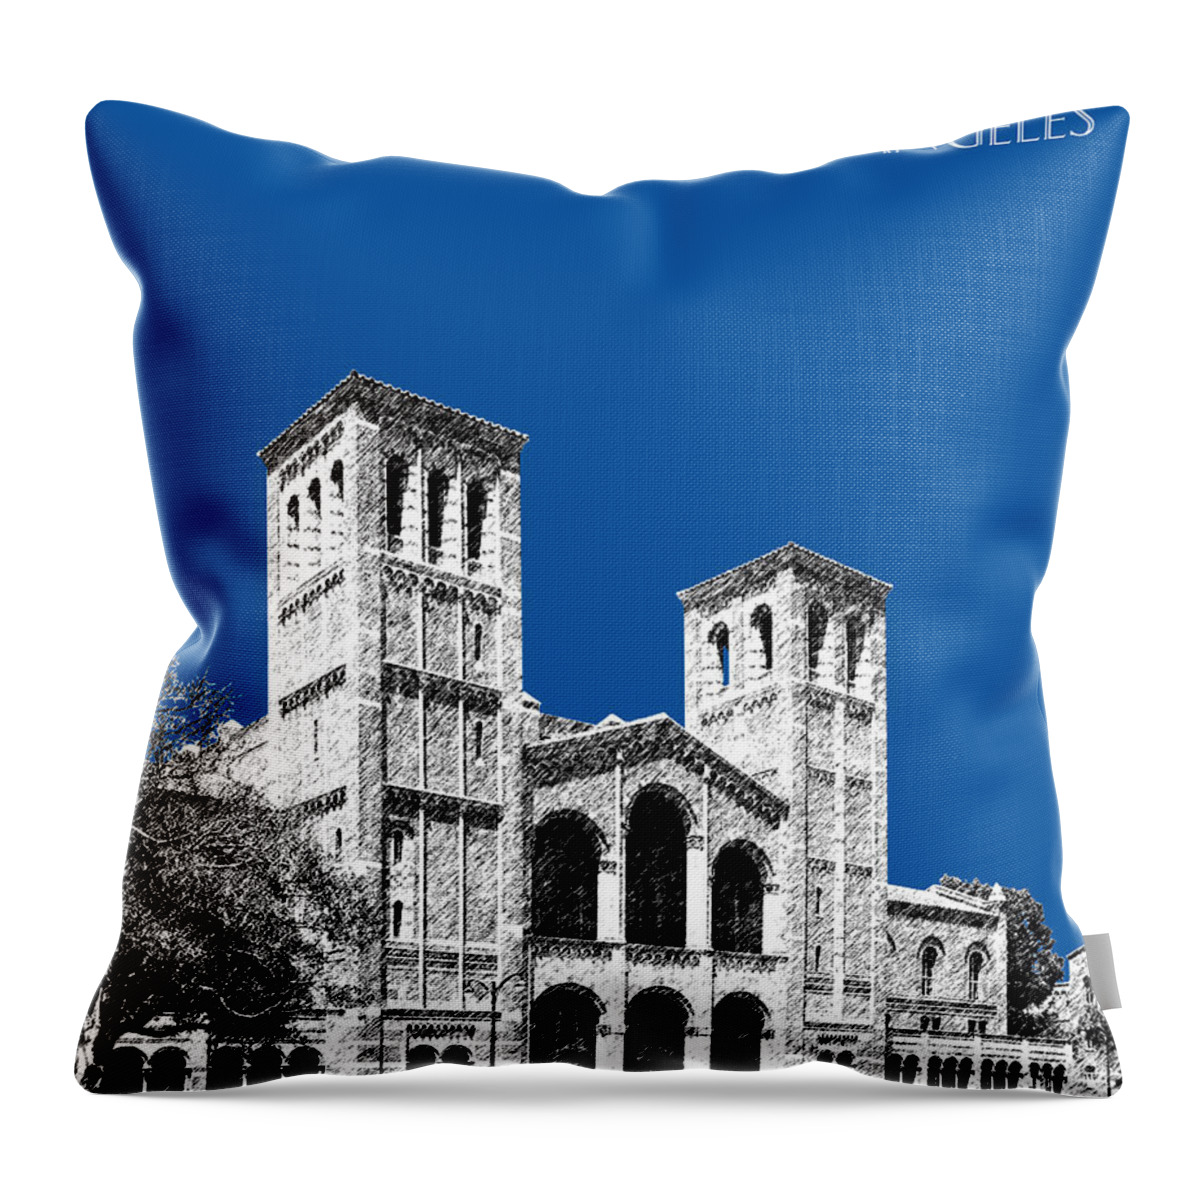 University Throw Pillow featuring the digital art University of California Los Angeles - Royal Blue by DB Artist